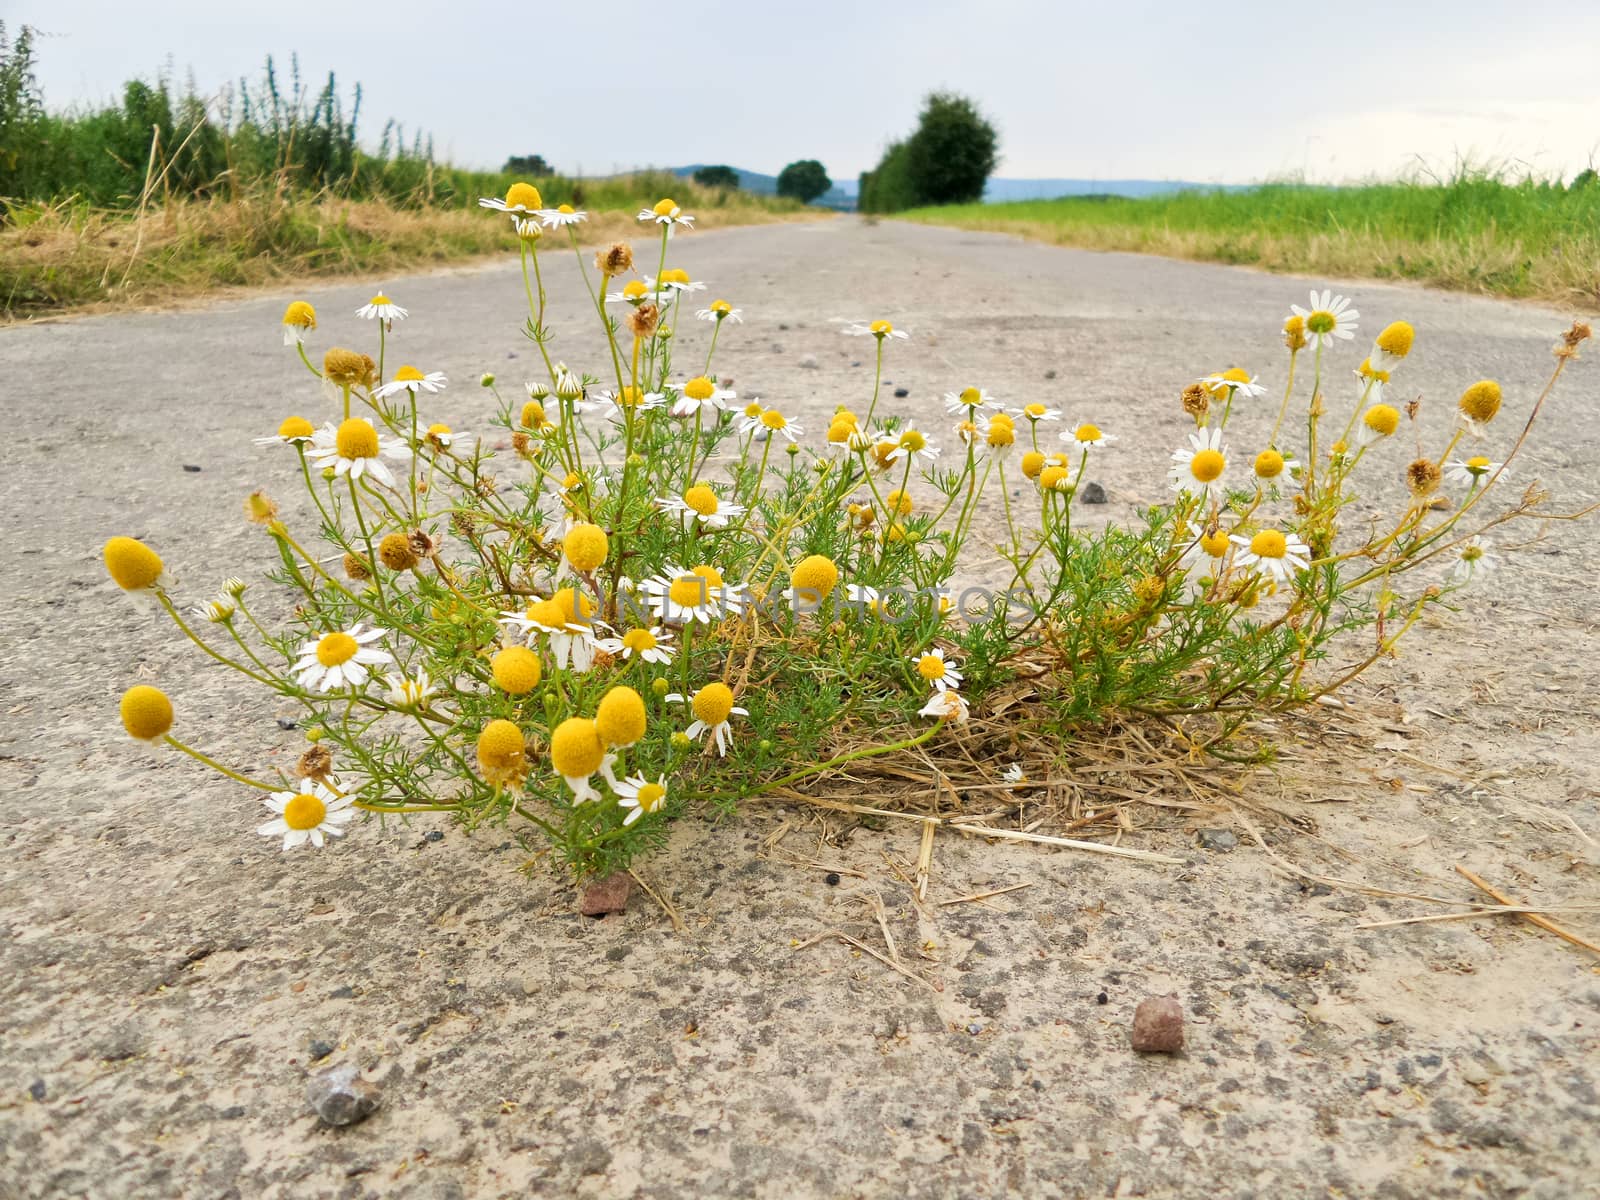 Chamomile grows out on a road in the middle of the asphalt.